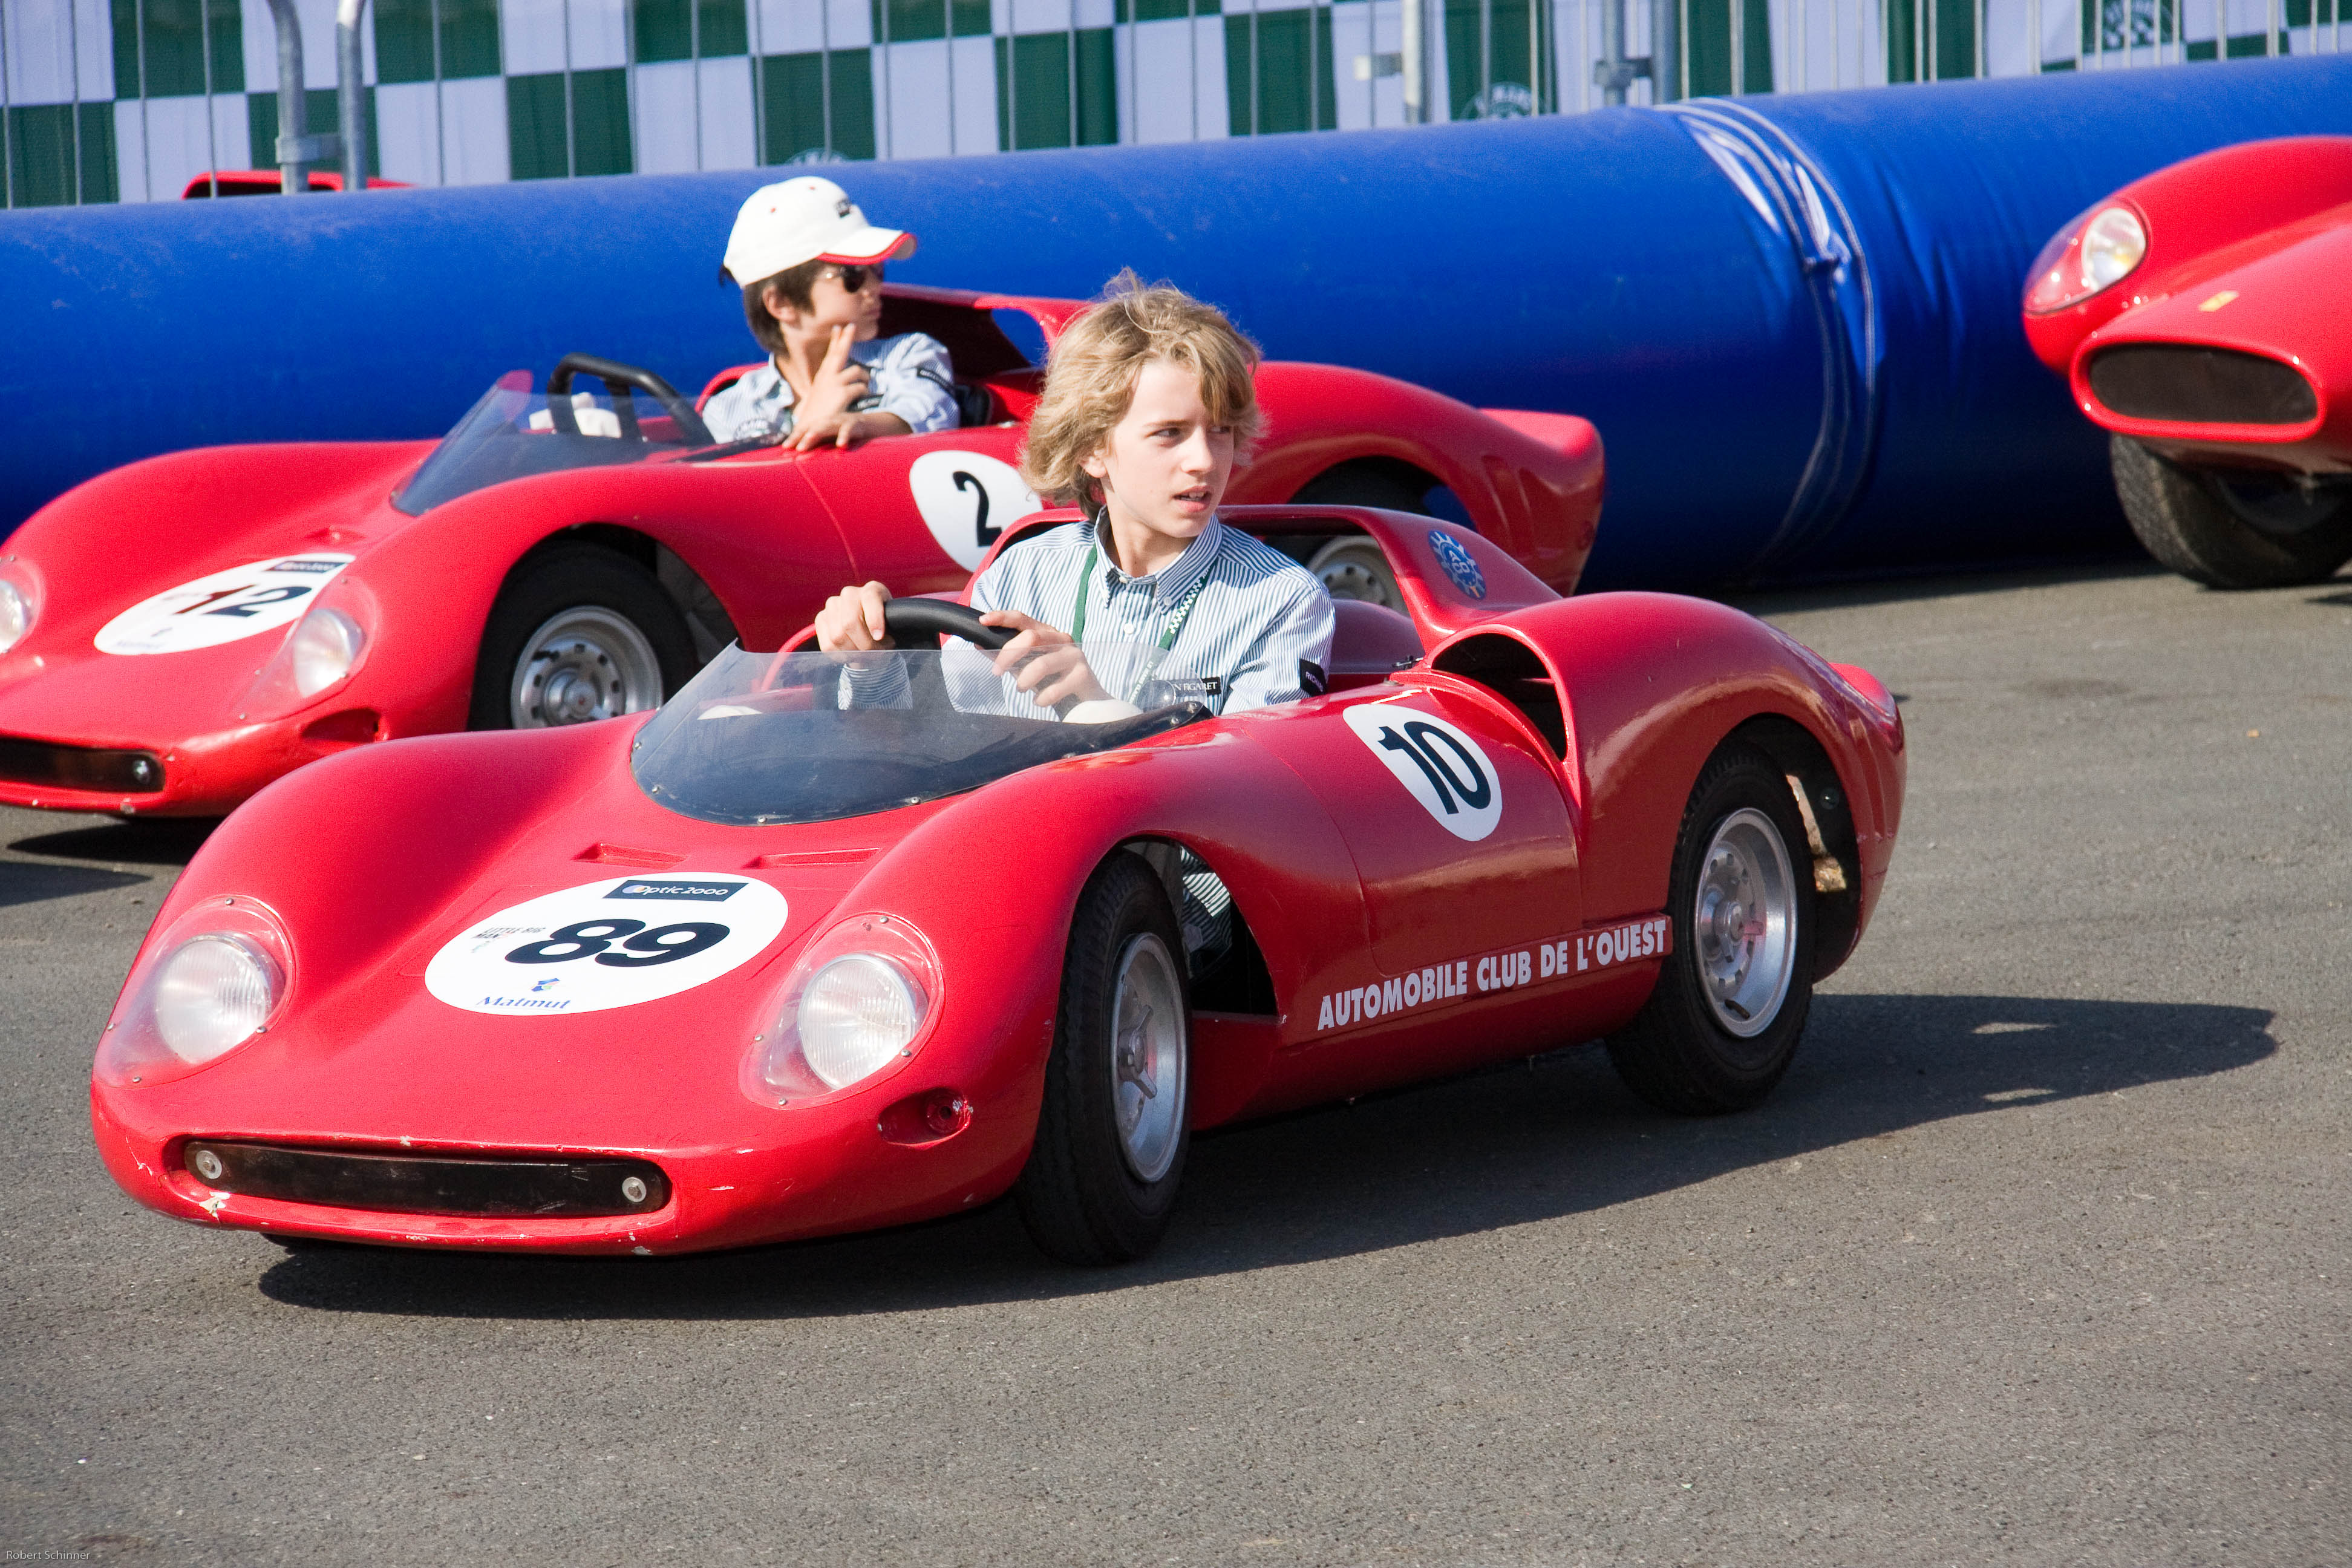 Kinder auto. Racing car for Kids. Sports cars. Kids. Labirint car for Kids. Auto Kid auto.